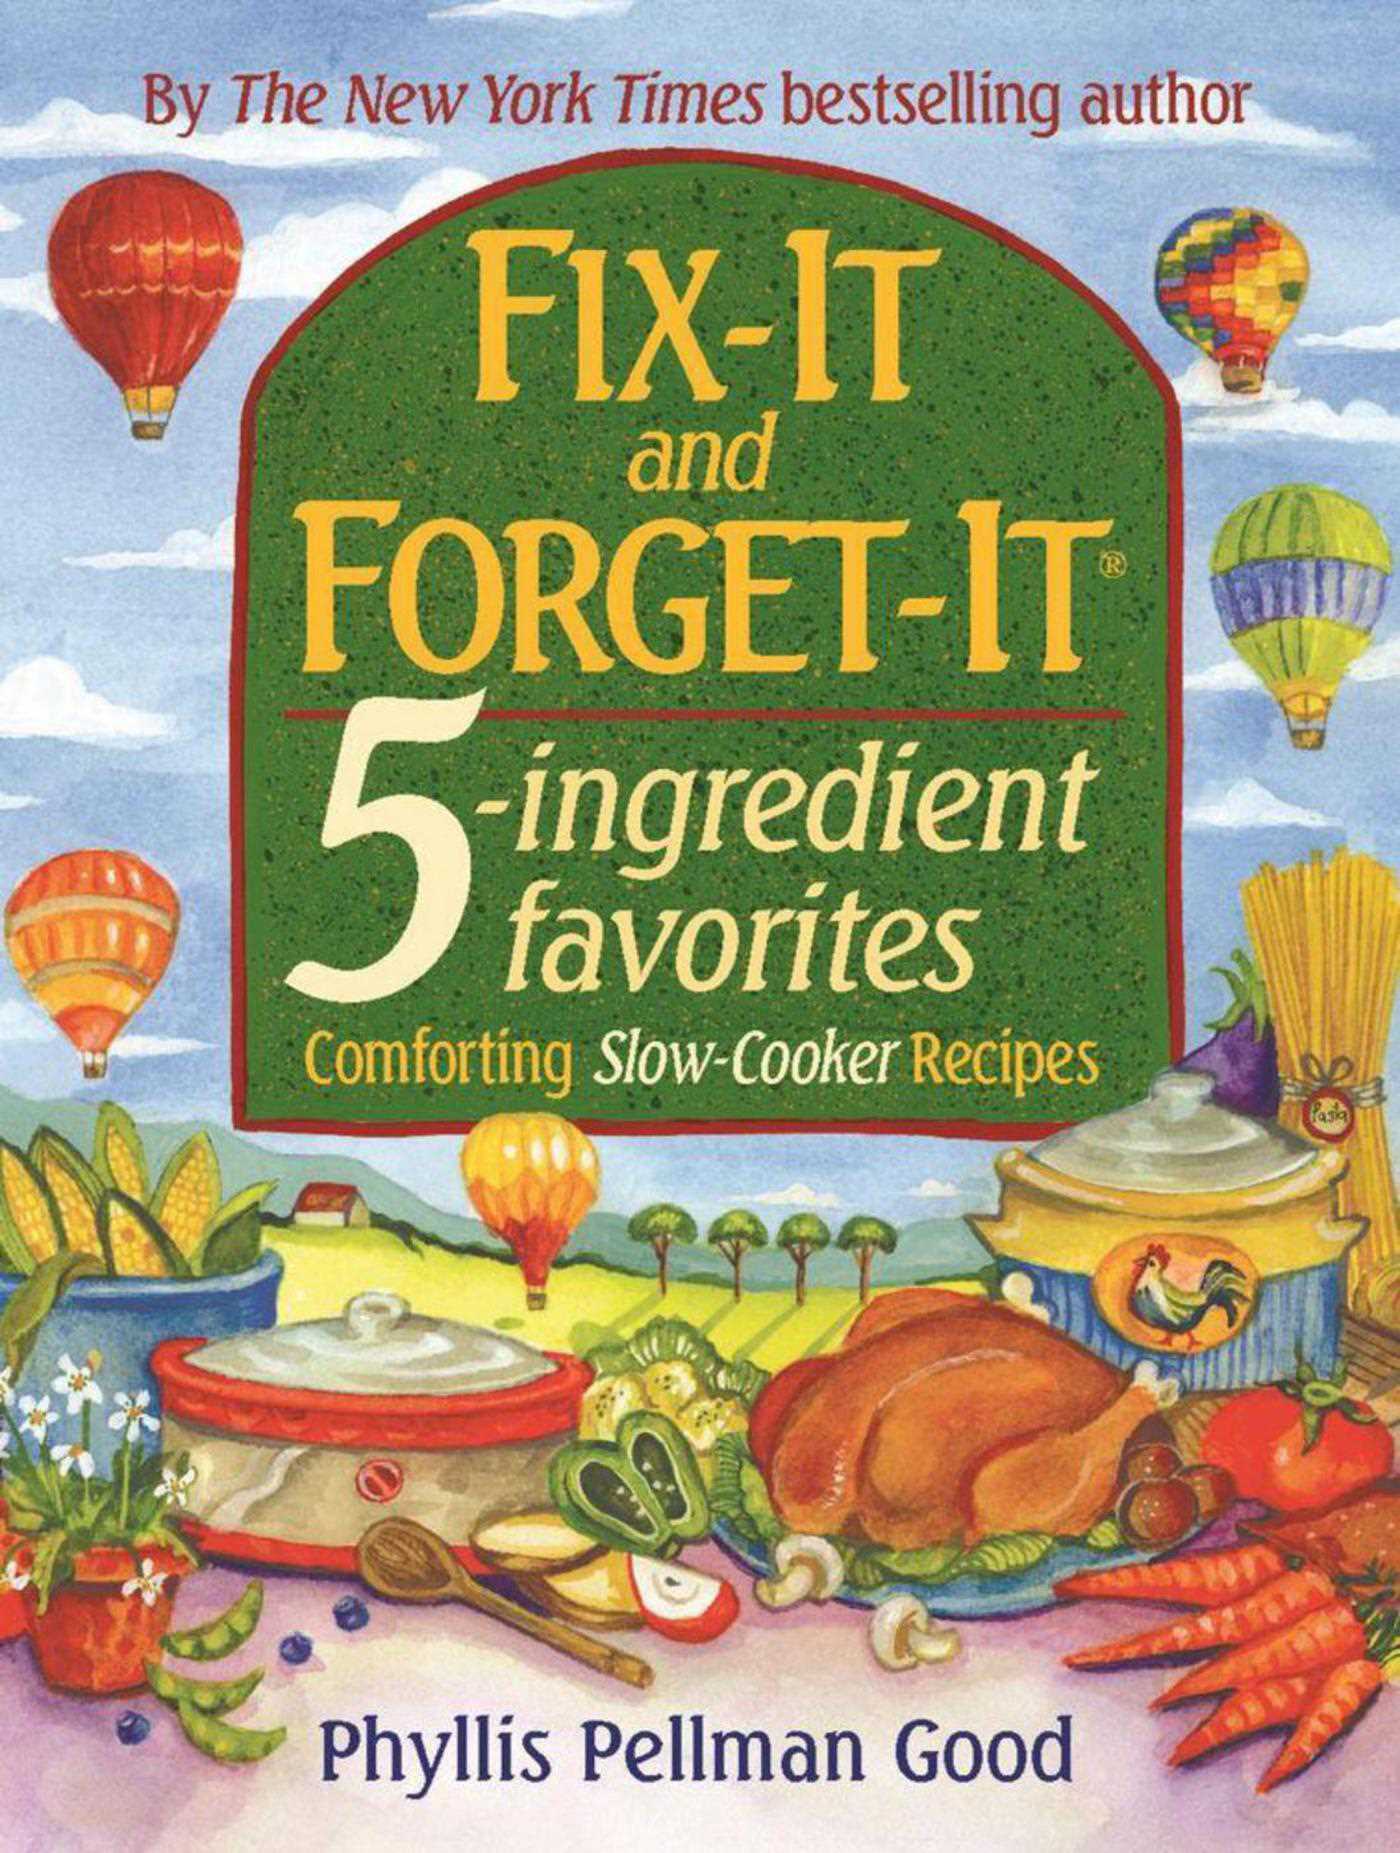 Fix-It and Forget-It 5-ingredient favorites : Comforting Slow-Cooker Recipes